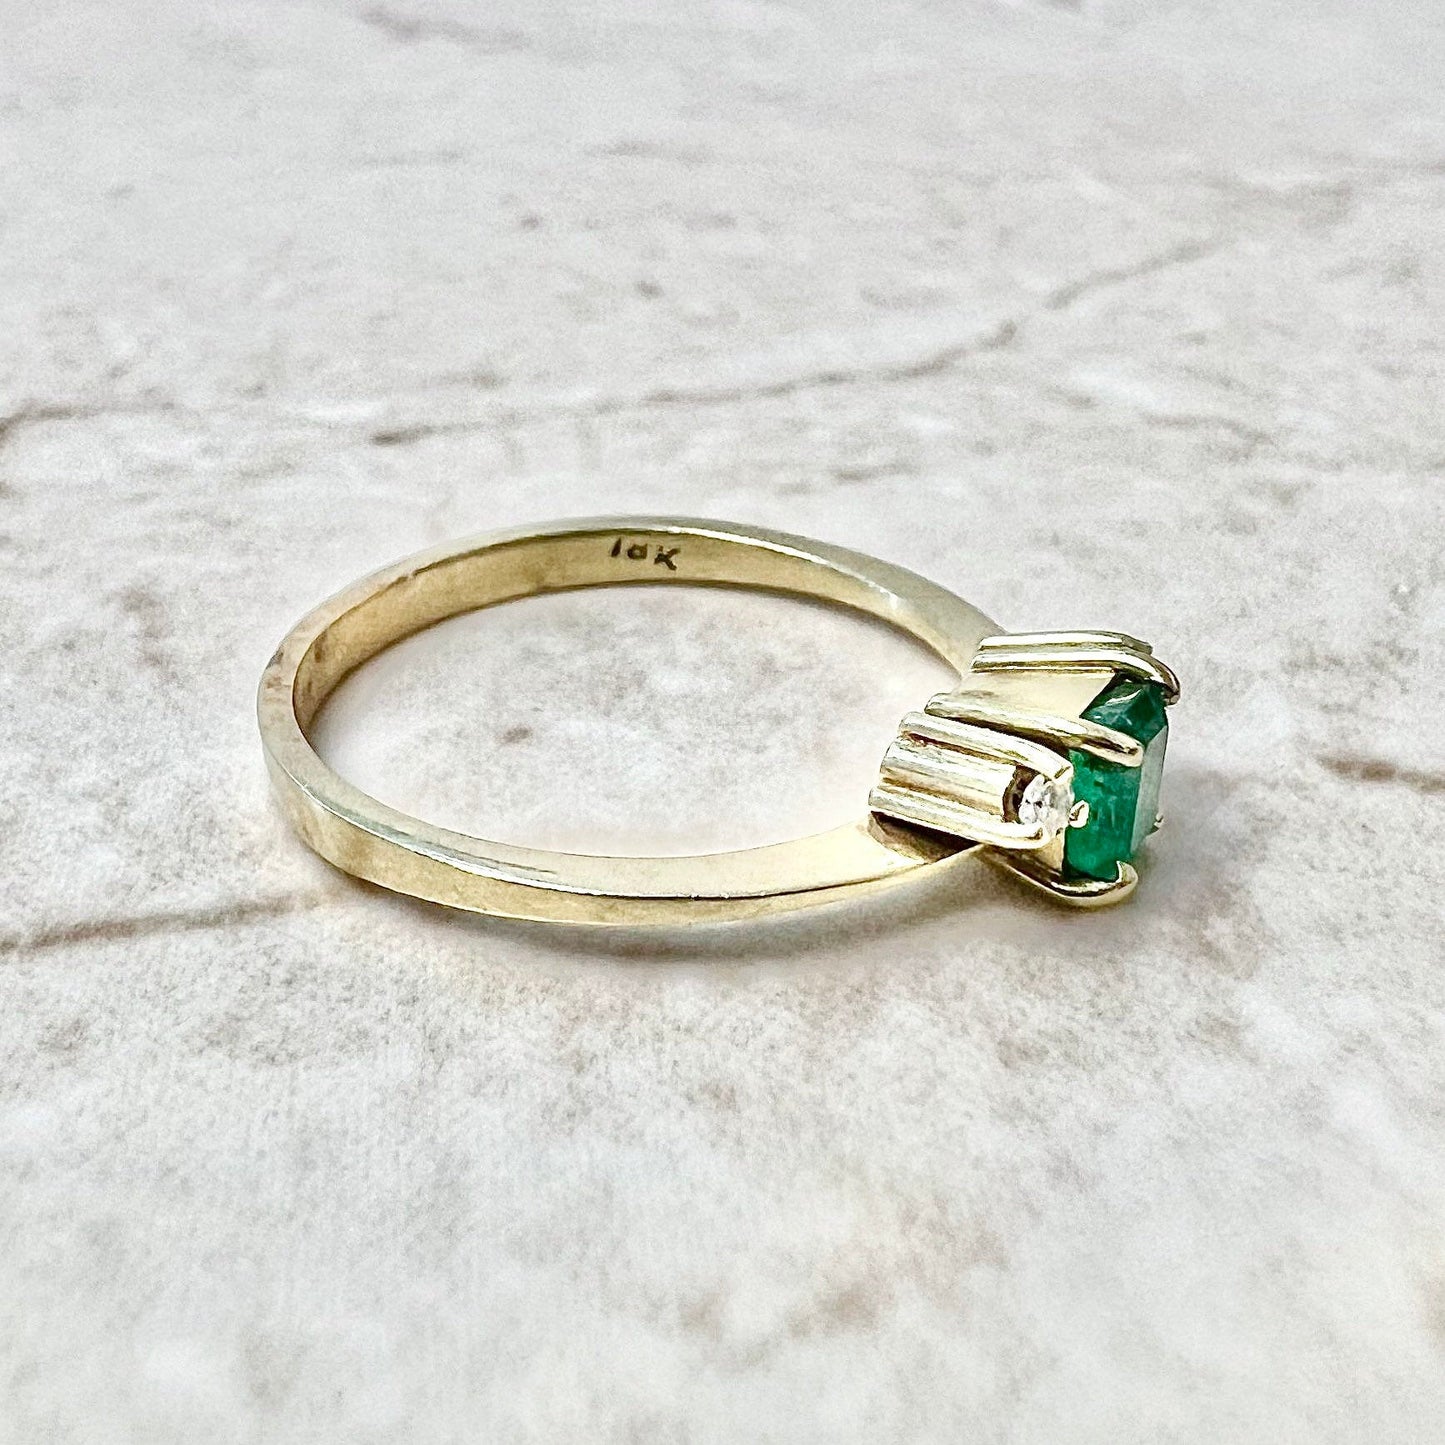 Vintage 18K Natural Emerald & Diamond Solitaire Ring - Yellow Gold Emerald Cocktail Ring - Engagement Ring - May Birthstone - Birthday Gift